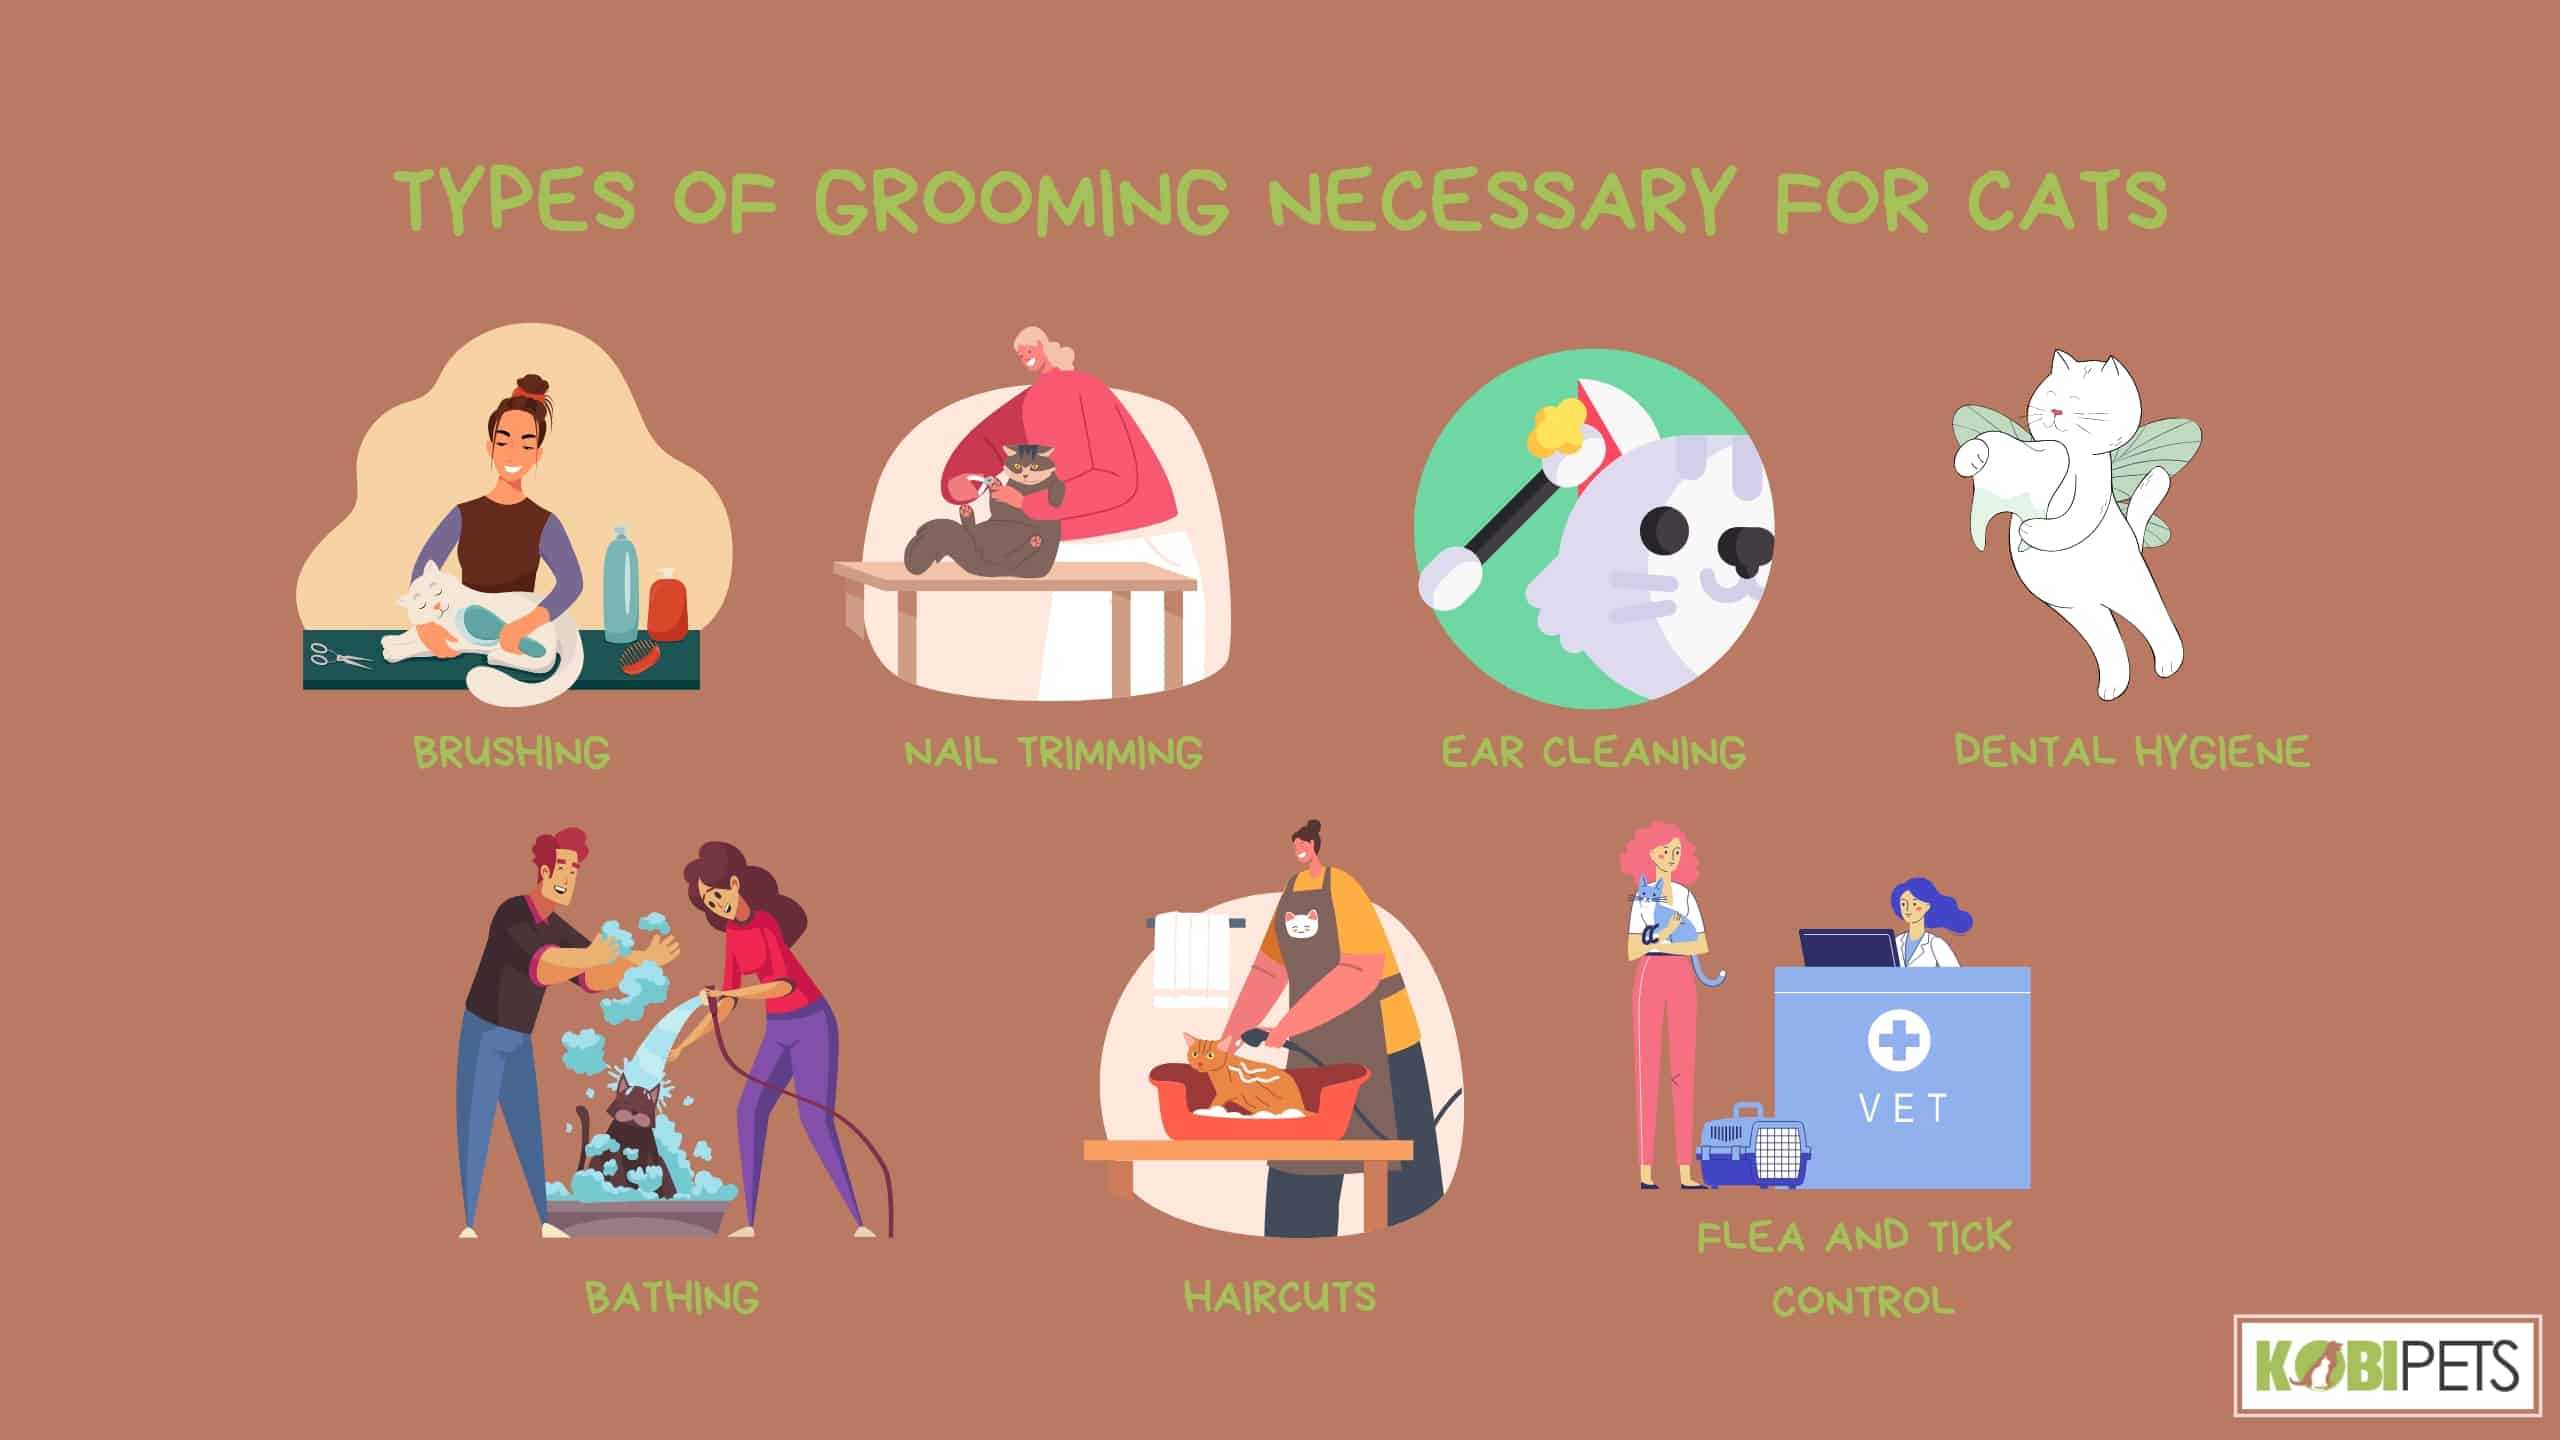 Types of Grooming Necessary for Cats